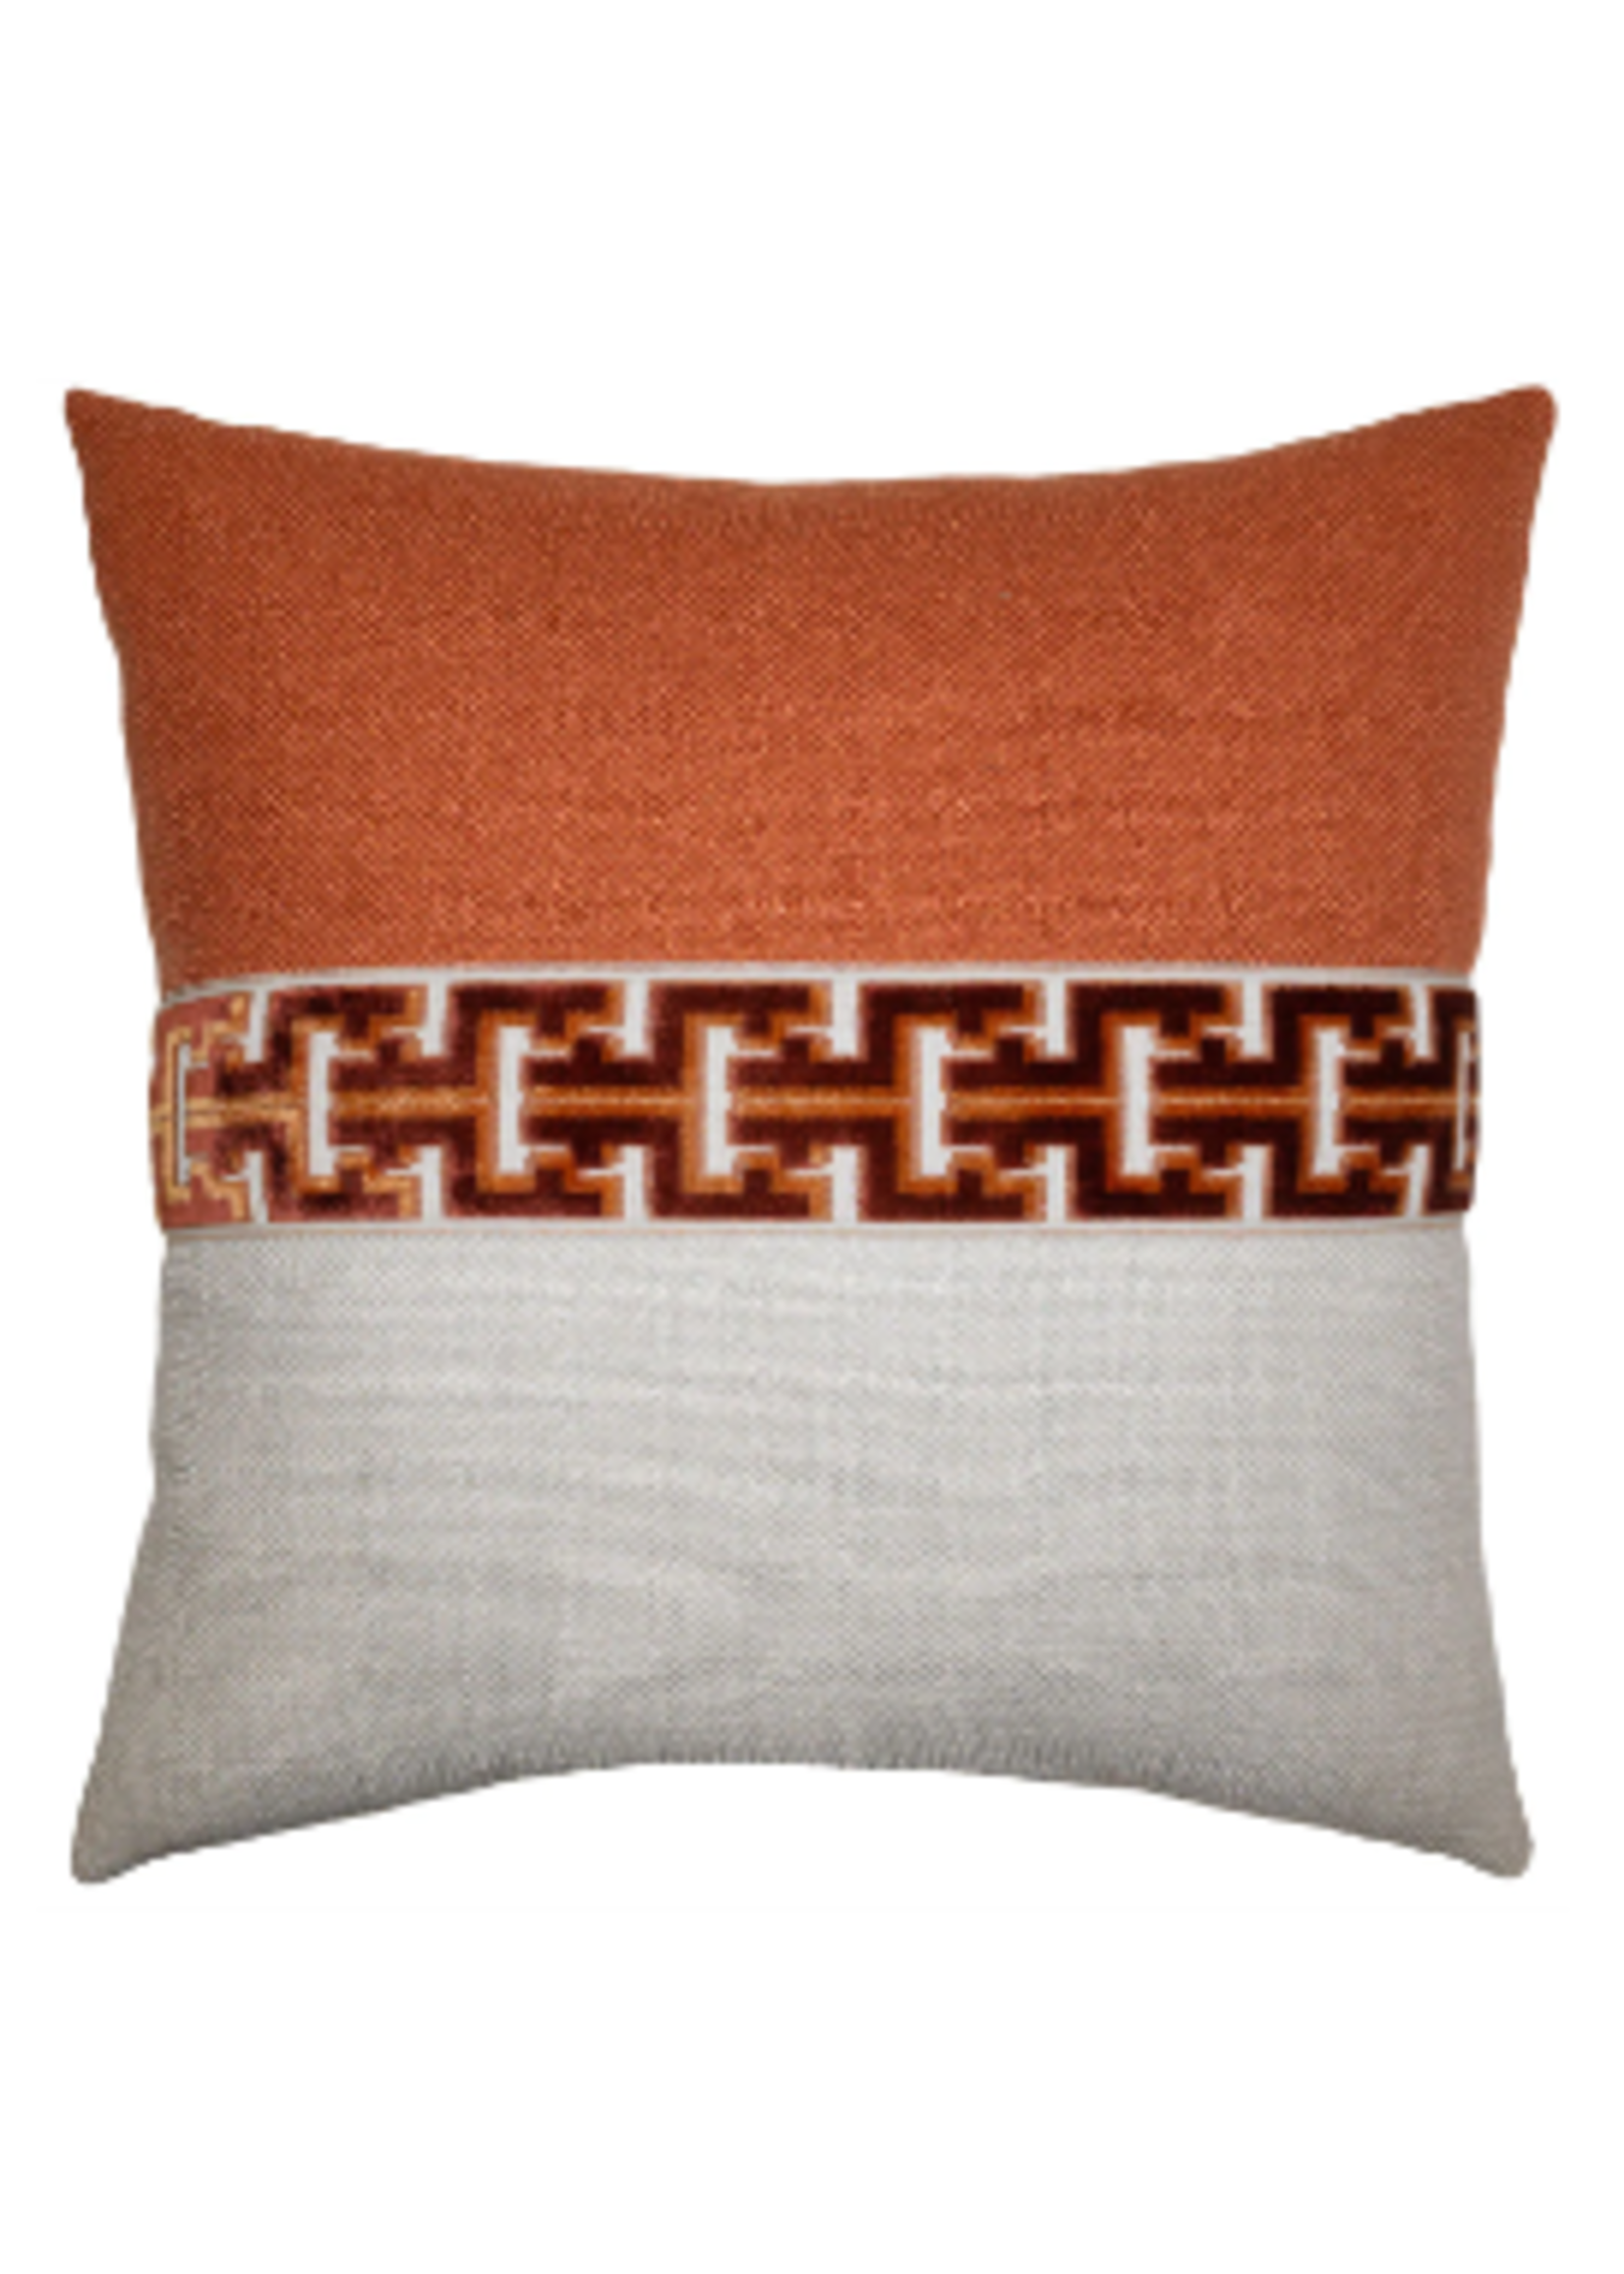 Square Feathers Square Feathers Jager Saffron 20x20 Pillow